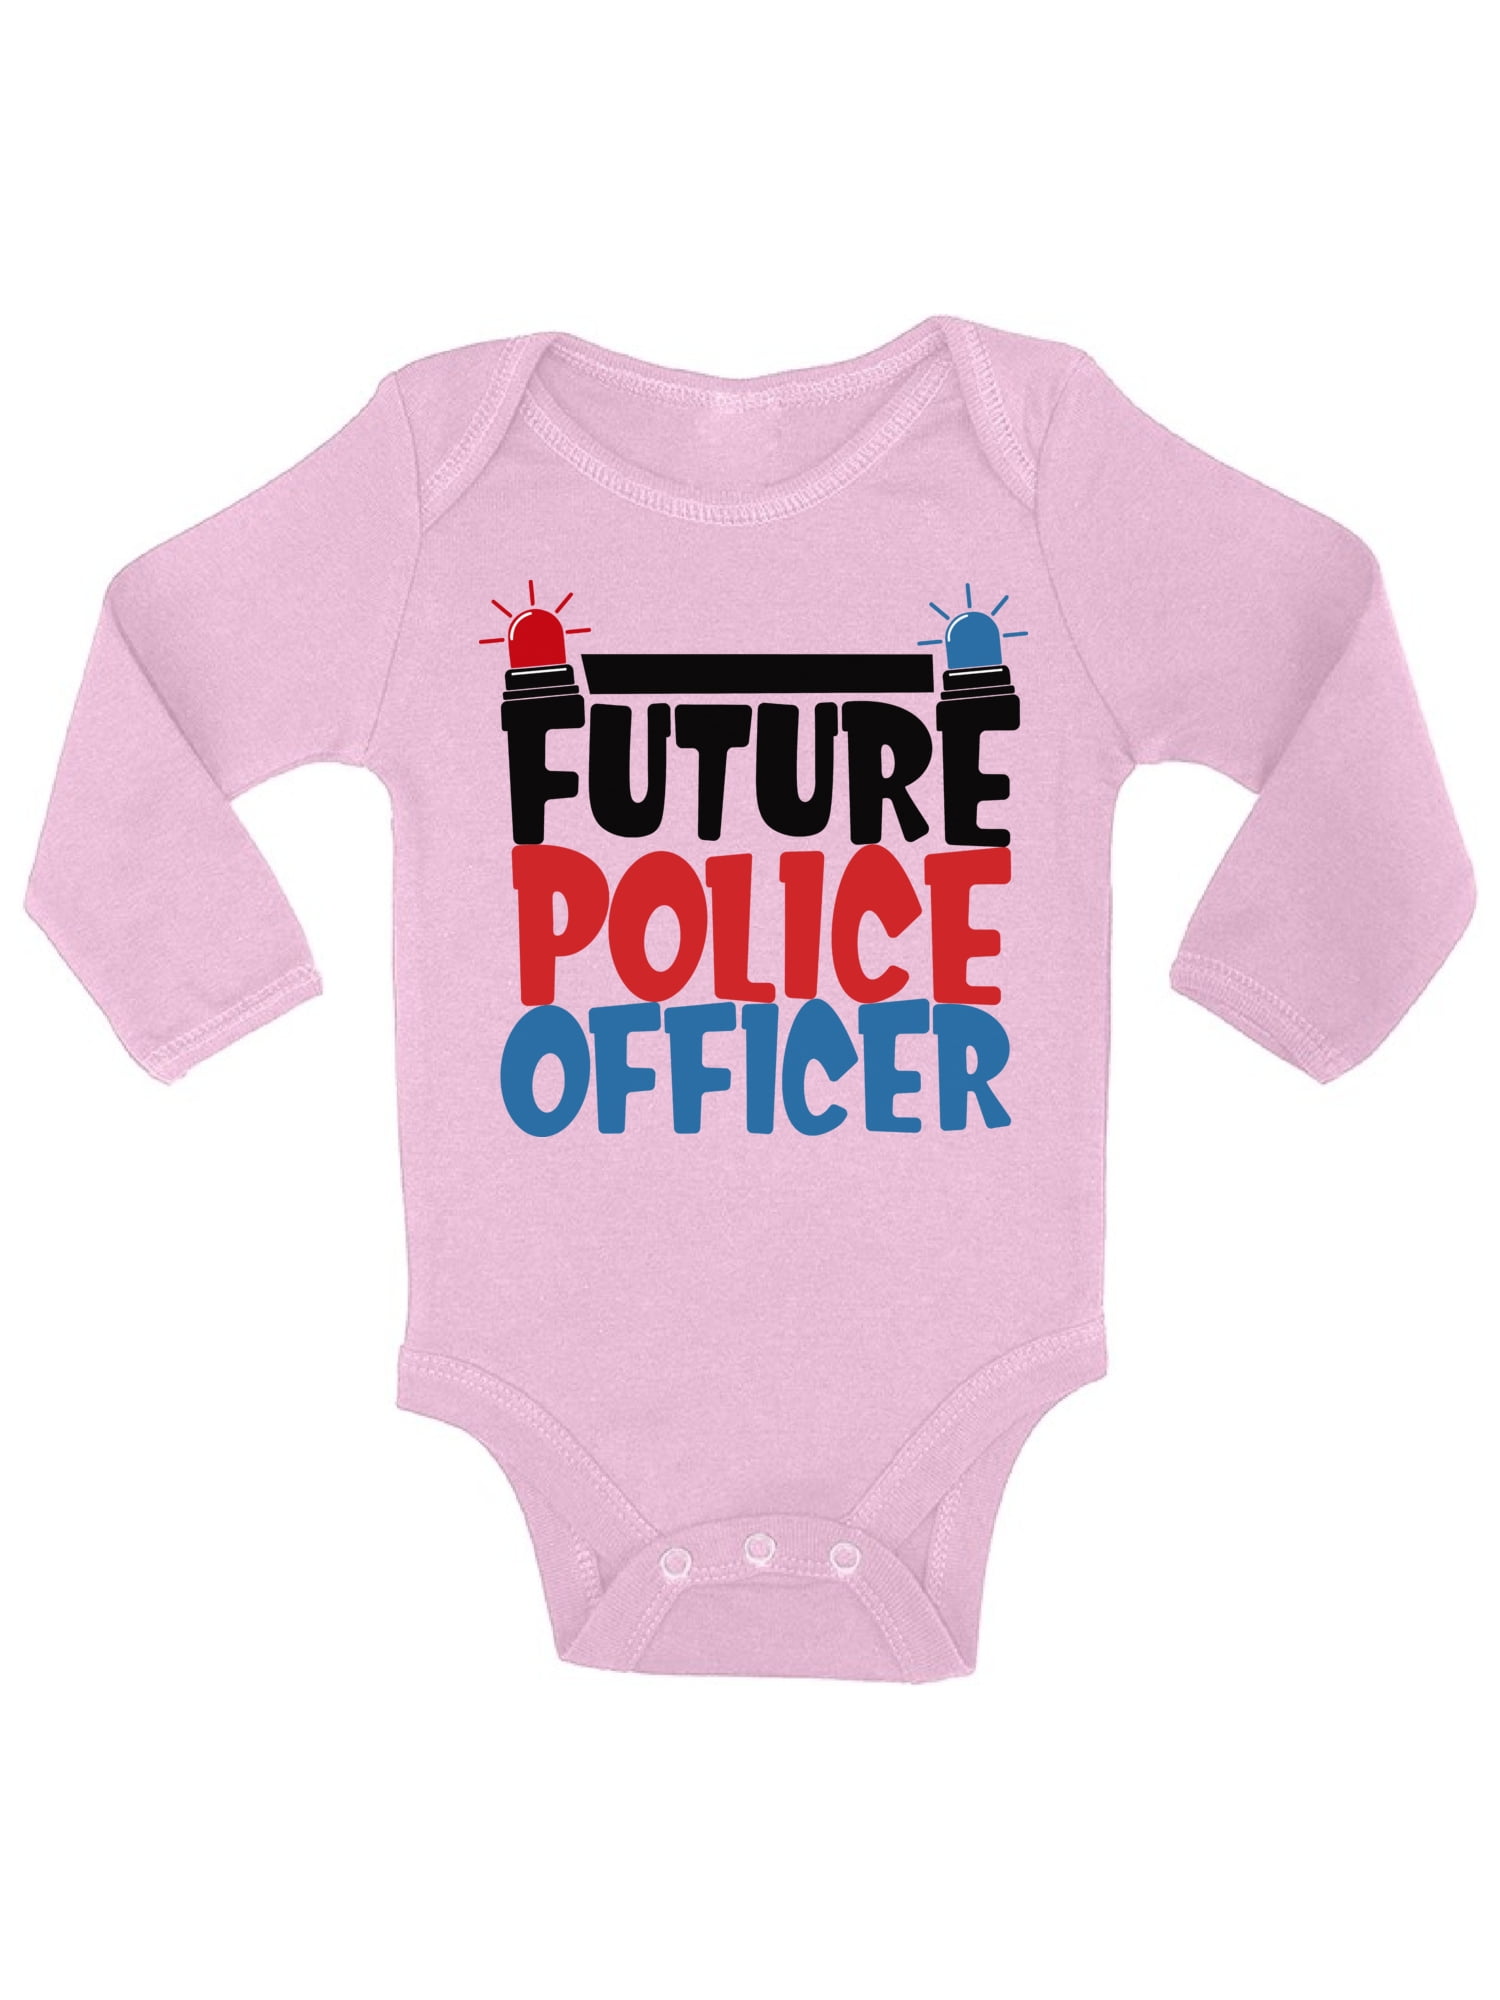 The Police Dimensions Newborn Jumpsuit Baby Long Sleeve Romper Bodysuit Clothes 